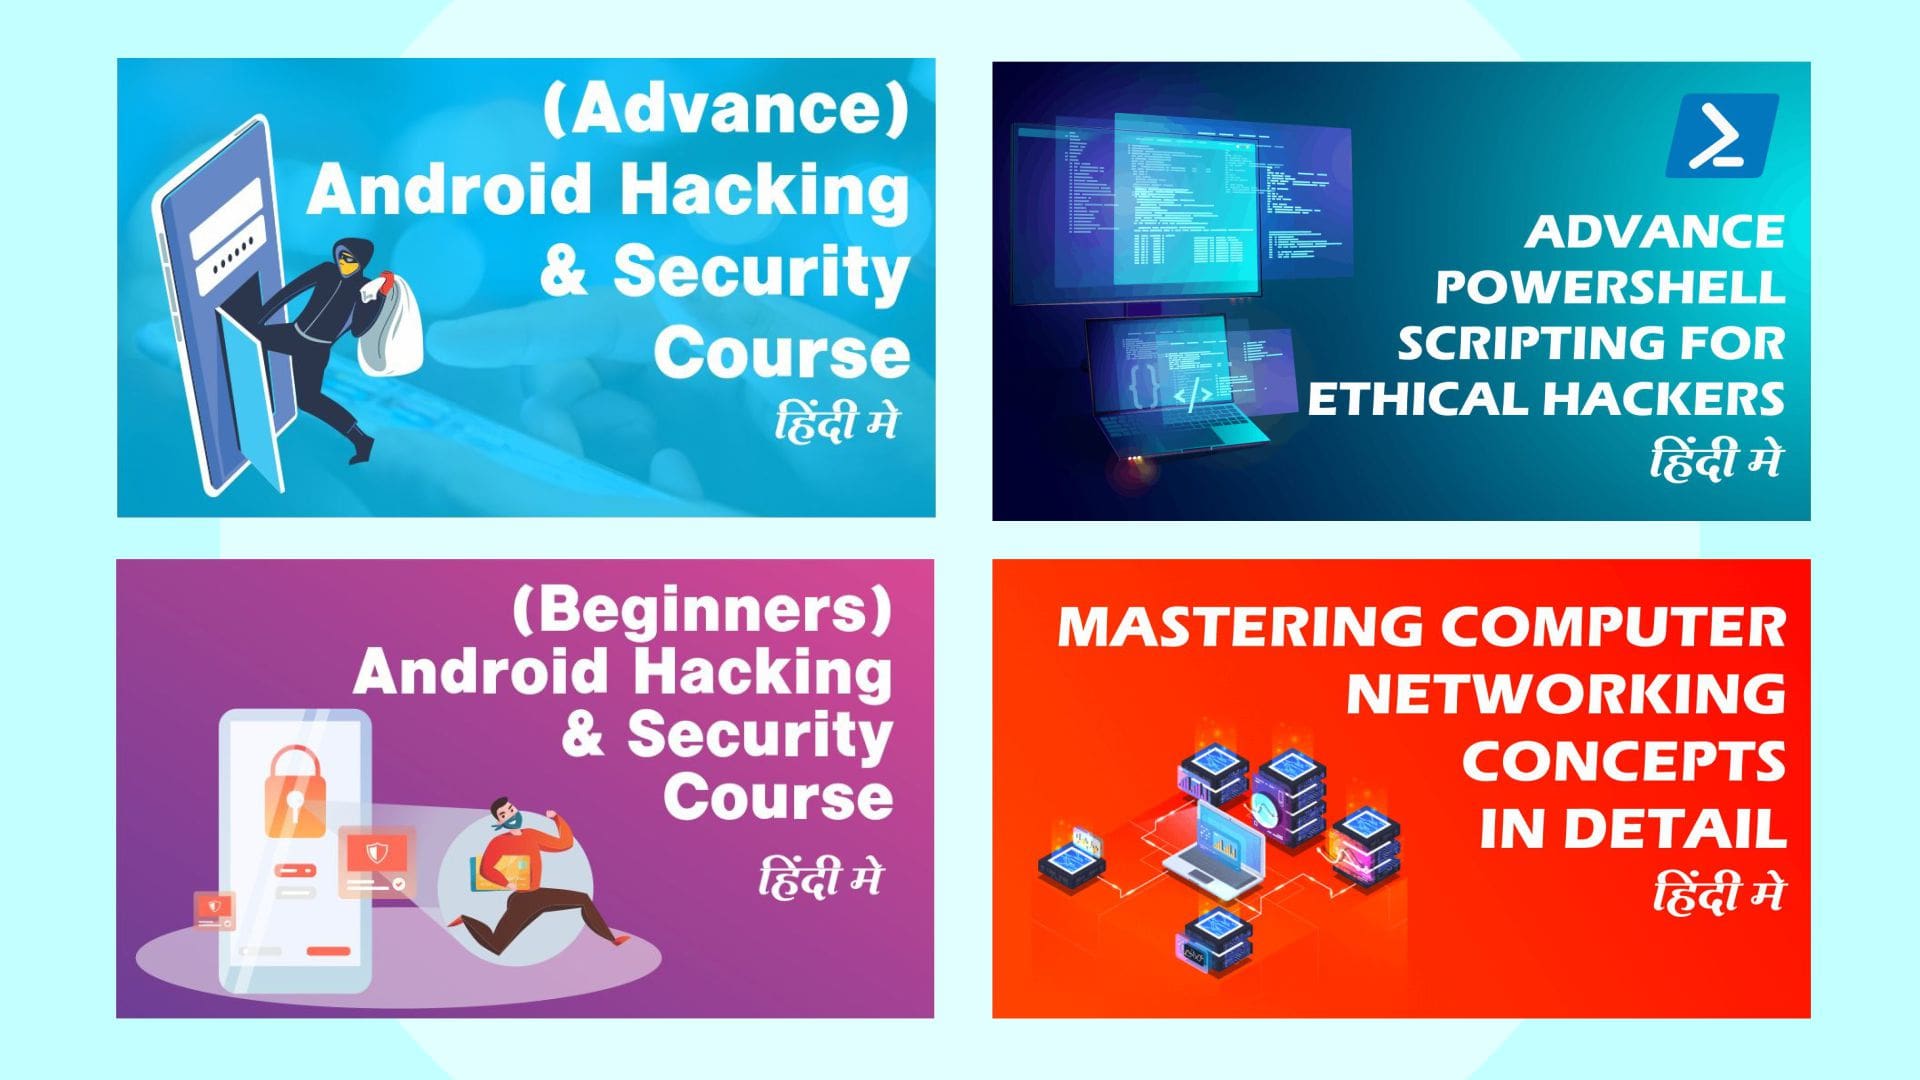 (Beginners) Android Hacking + (Advance) Android Hacking + Networking + Powershell Scripting 